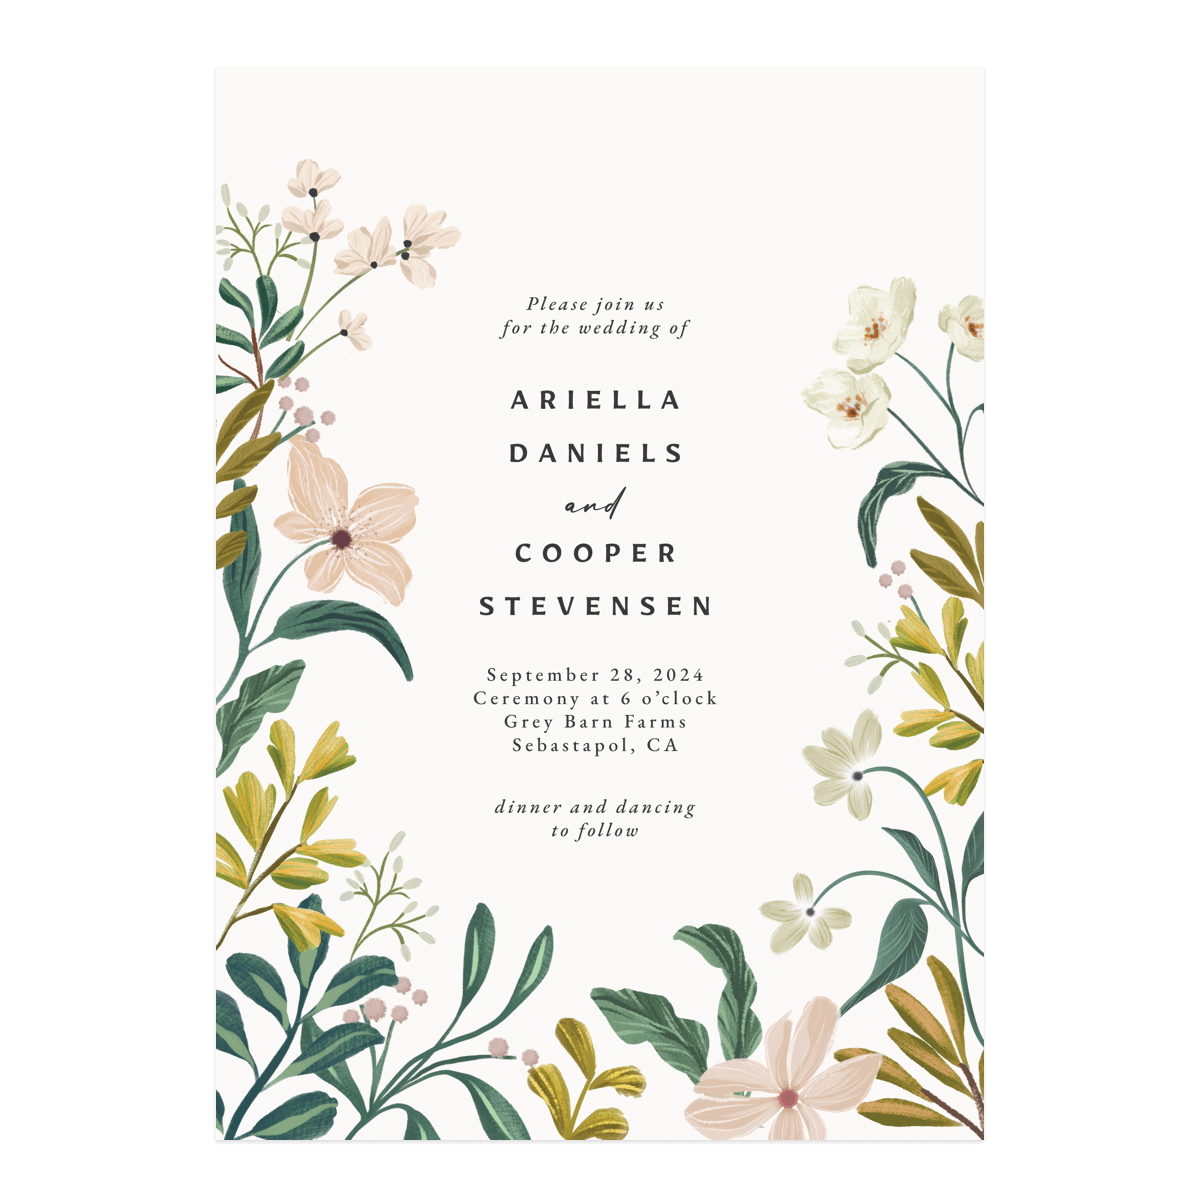 A Wedding Invitation from the Vintage Garden Collection